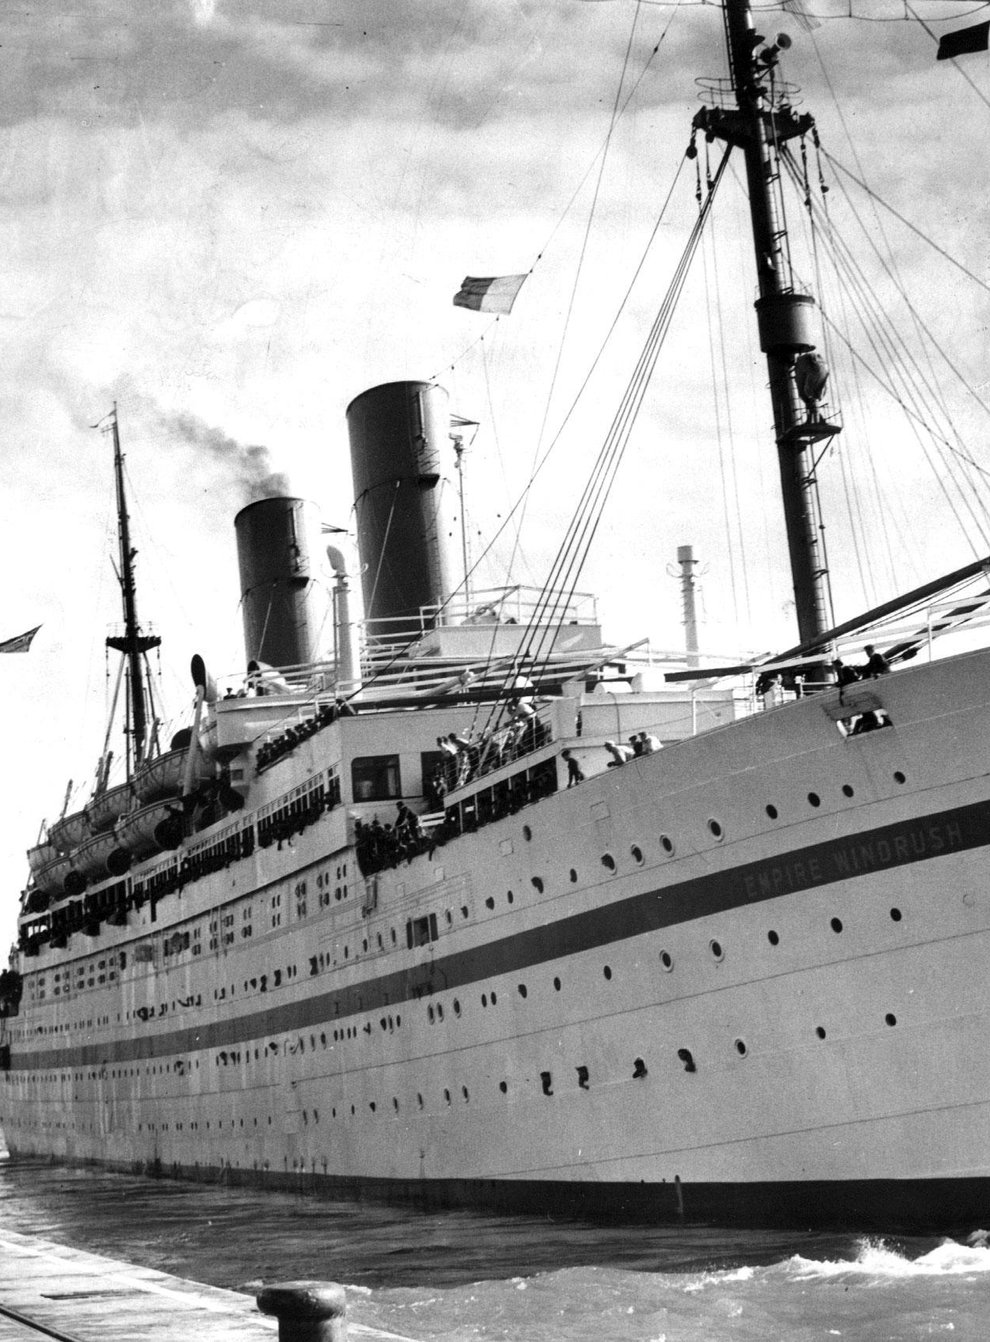 Inquiry launched into Windrush compensations after claims of 'serious delays'